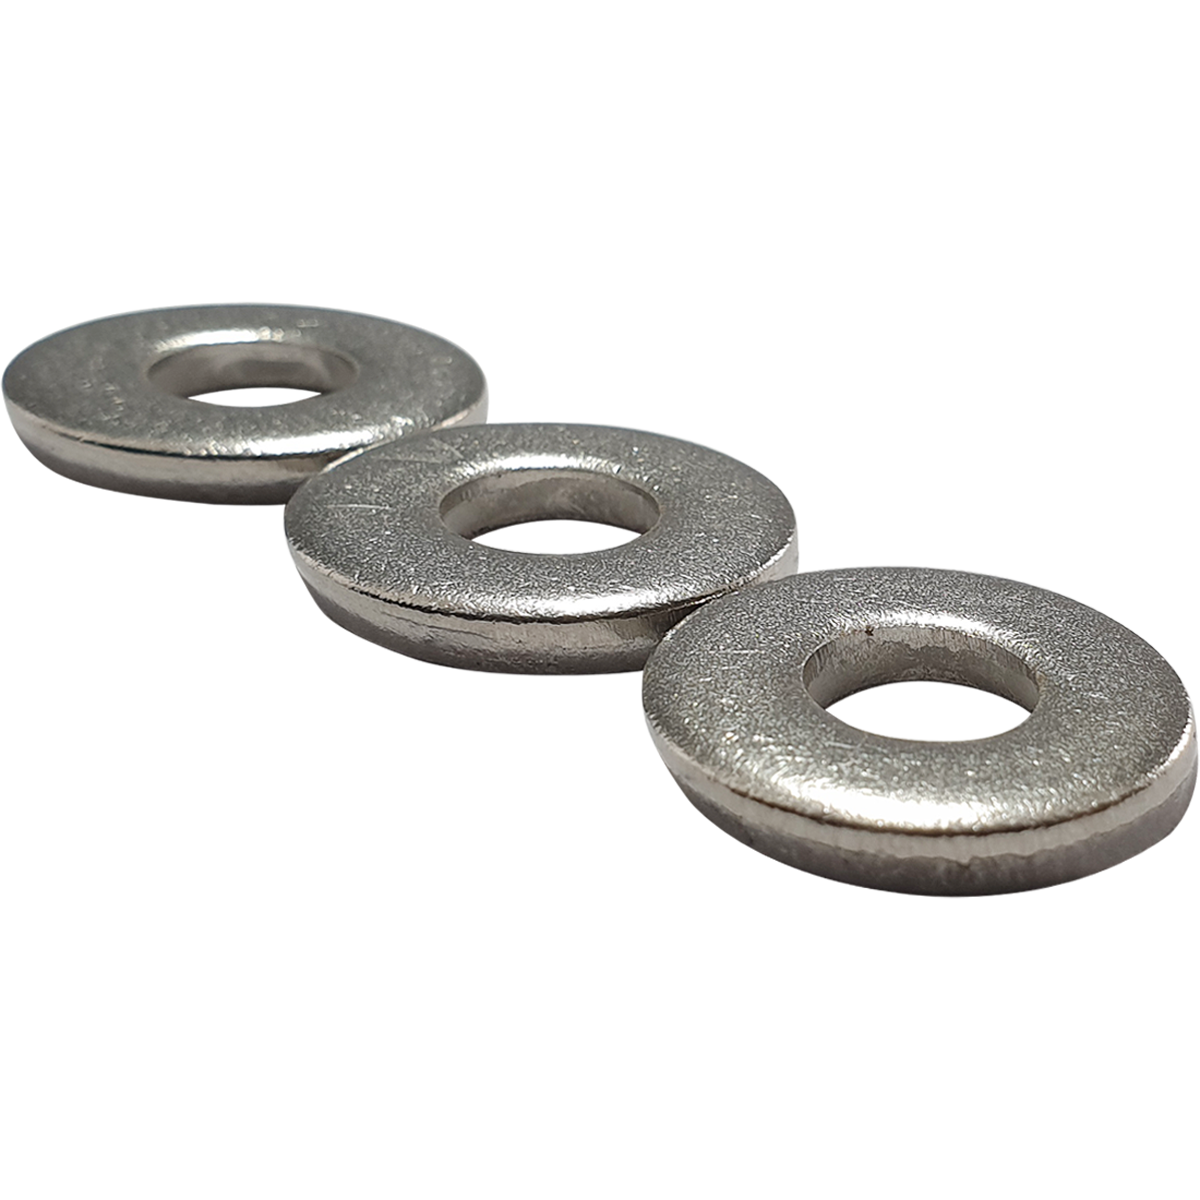 Heavy duty washers are available in a variety of sizes and at competitive prices.